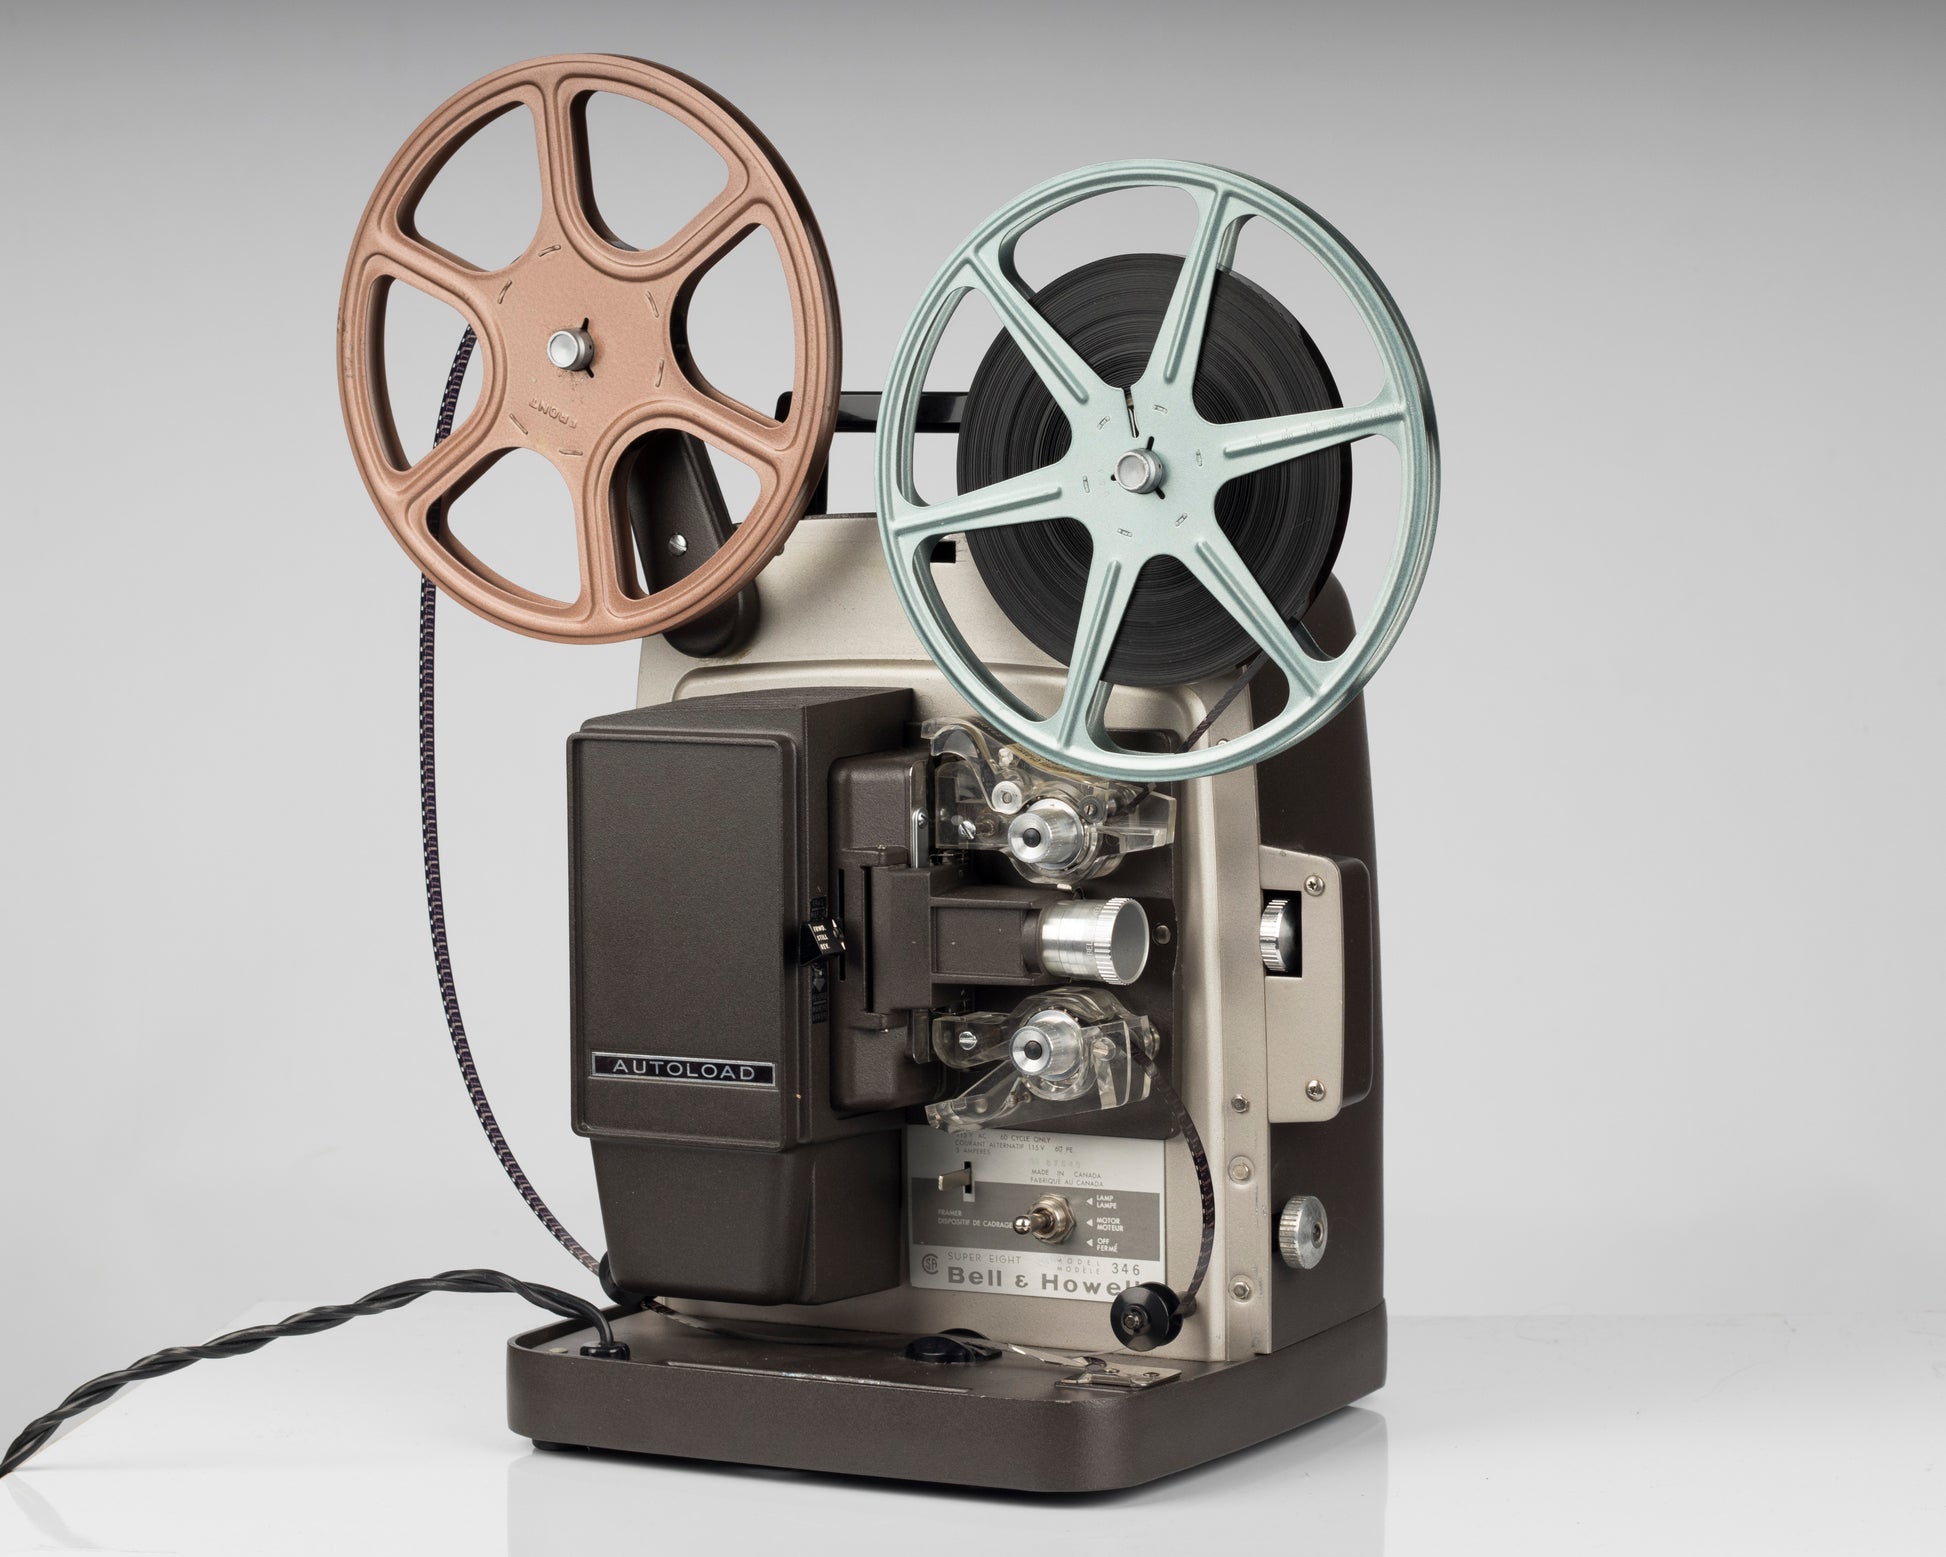 Bell and Howell Model 346 super 8 projector; front angle view with movie reels